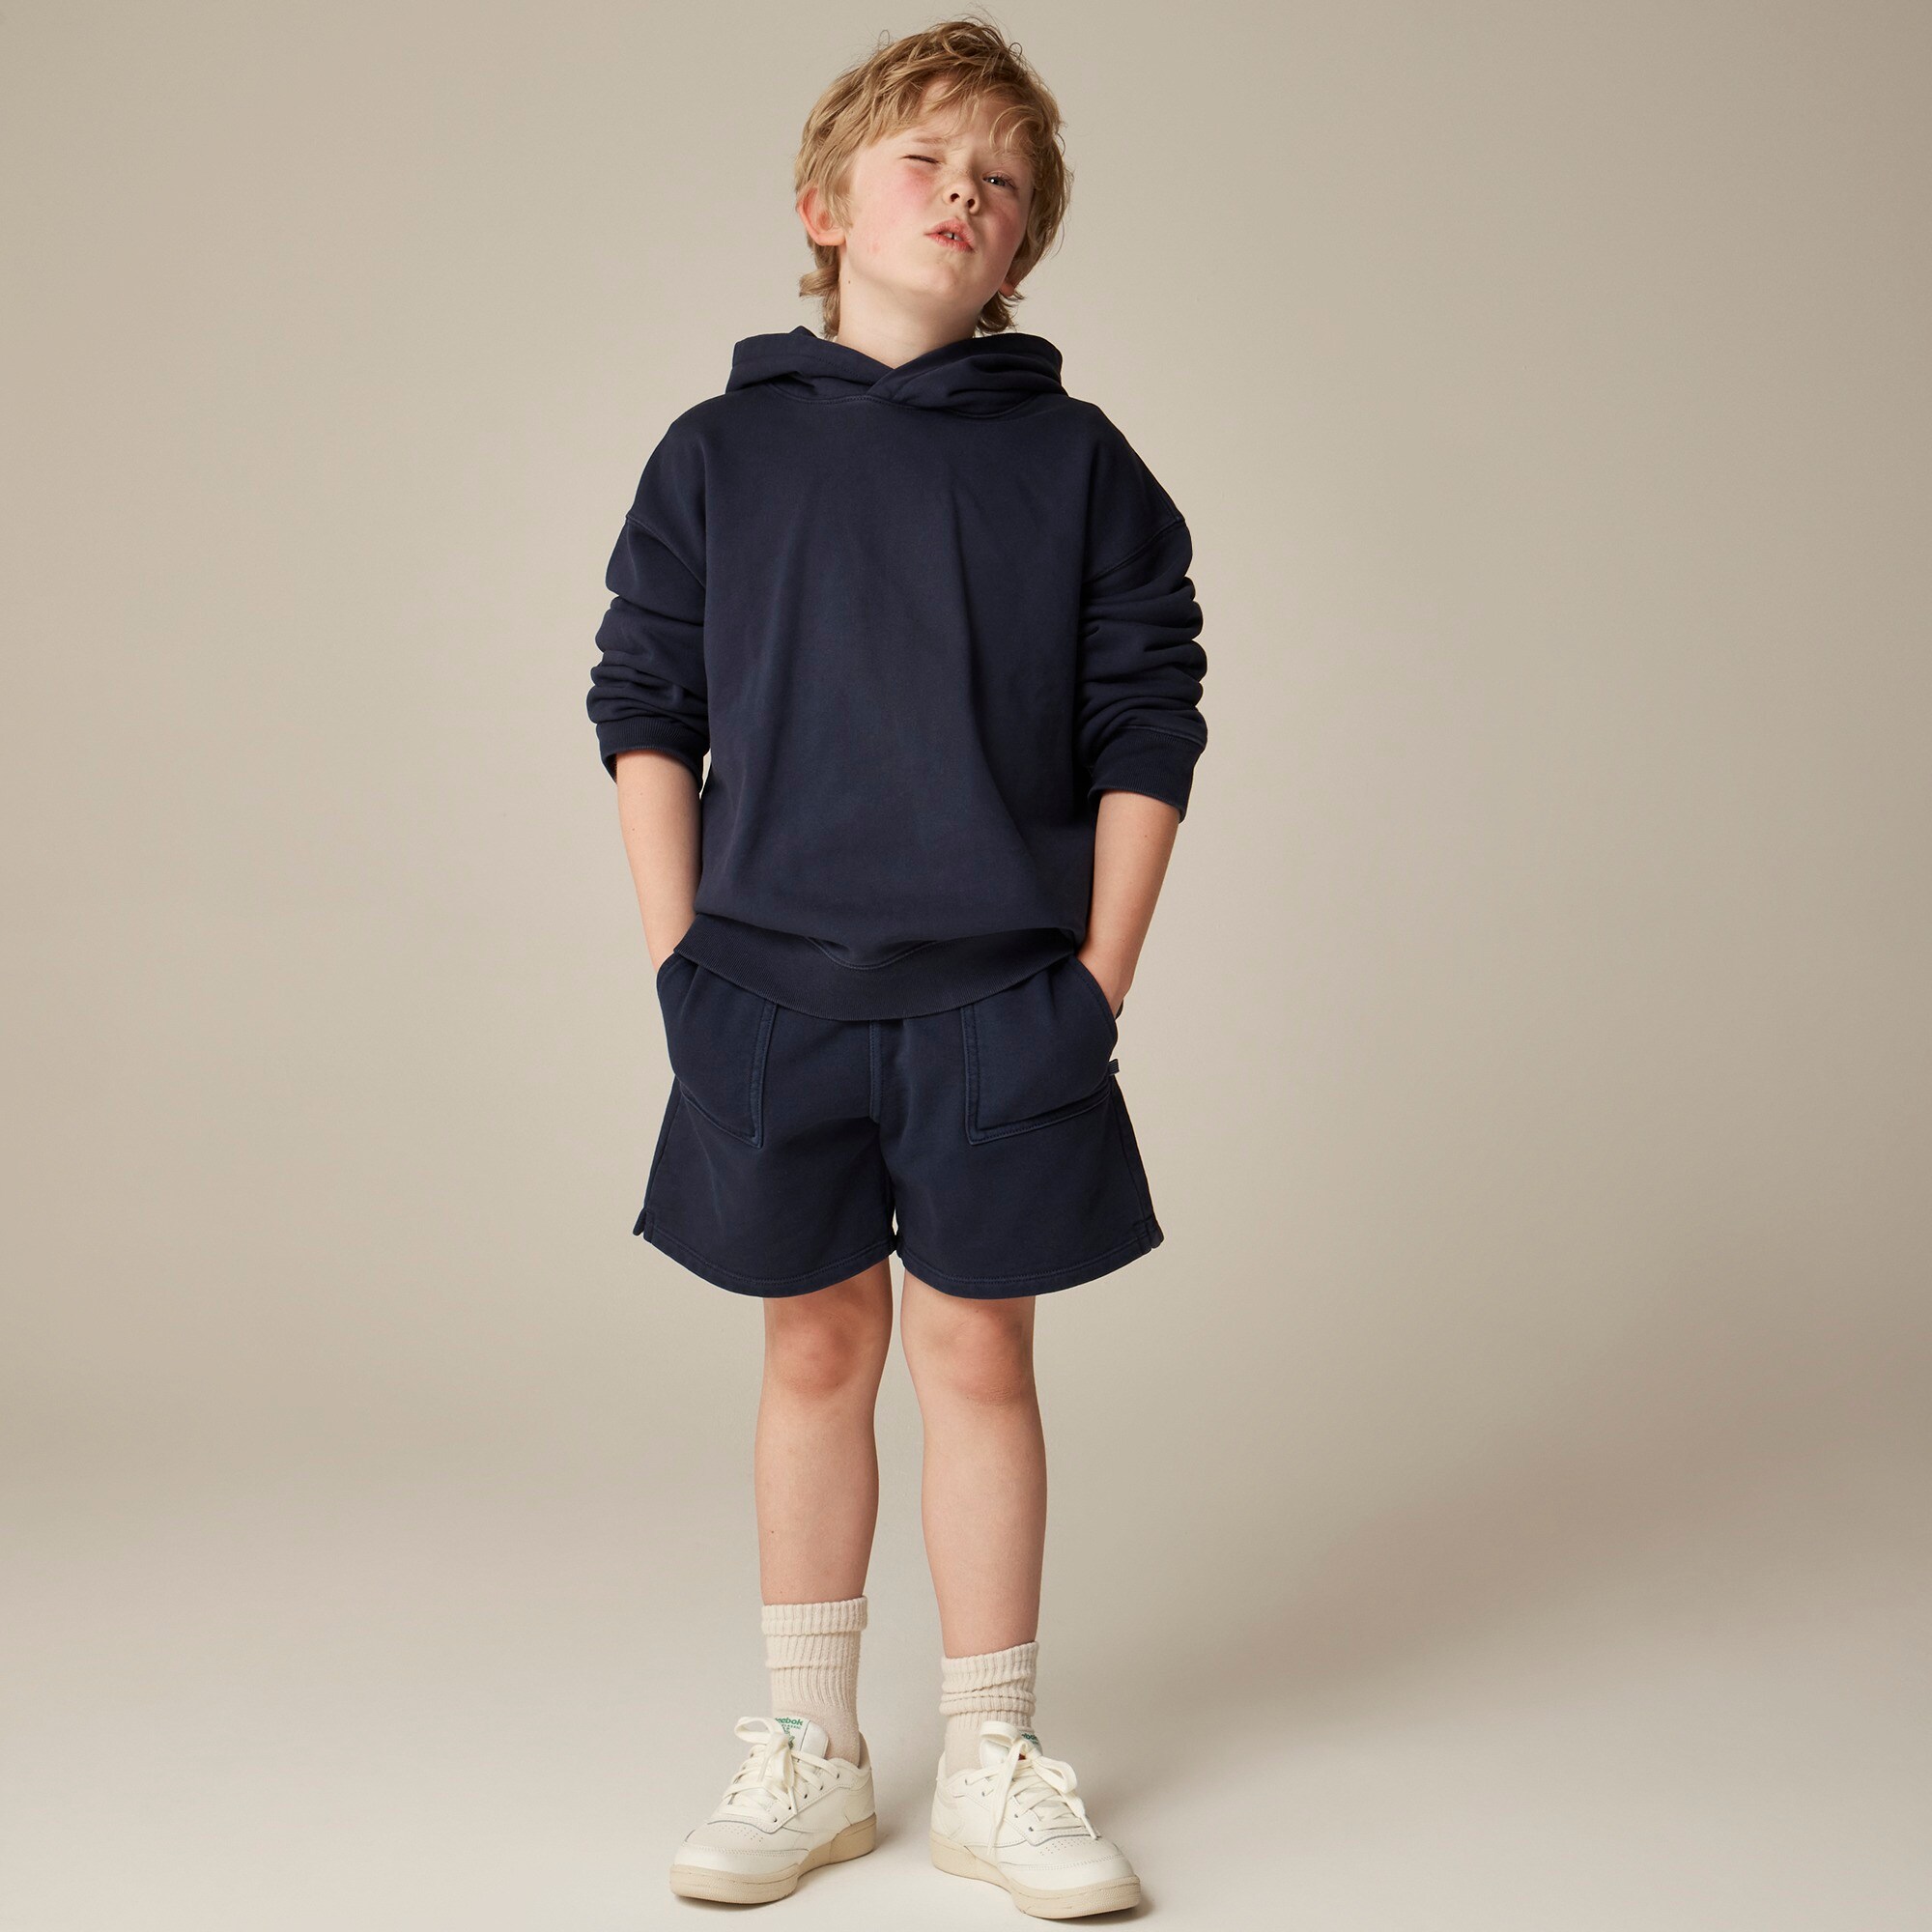  KID by Crewcuts garment-dyed short